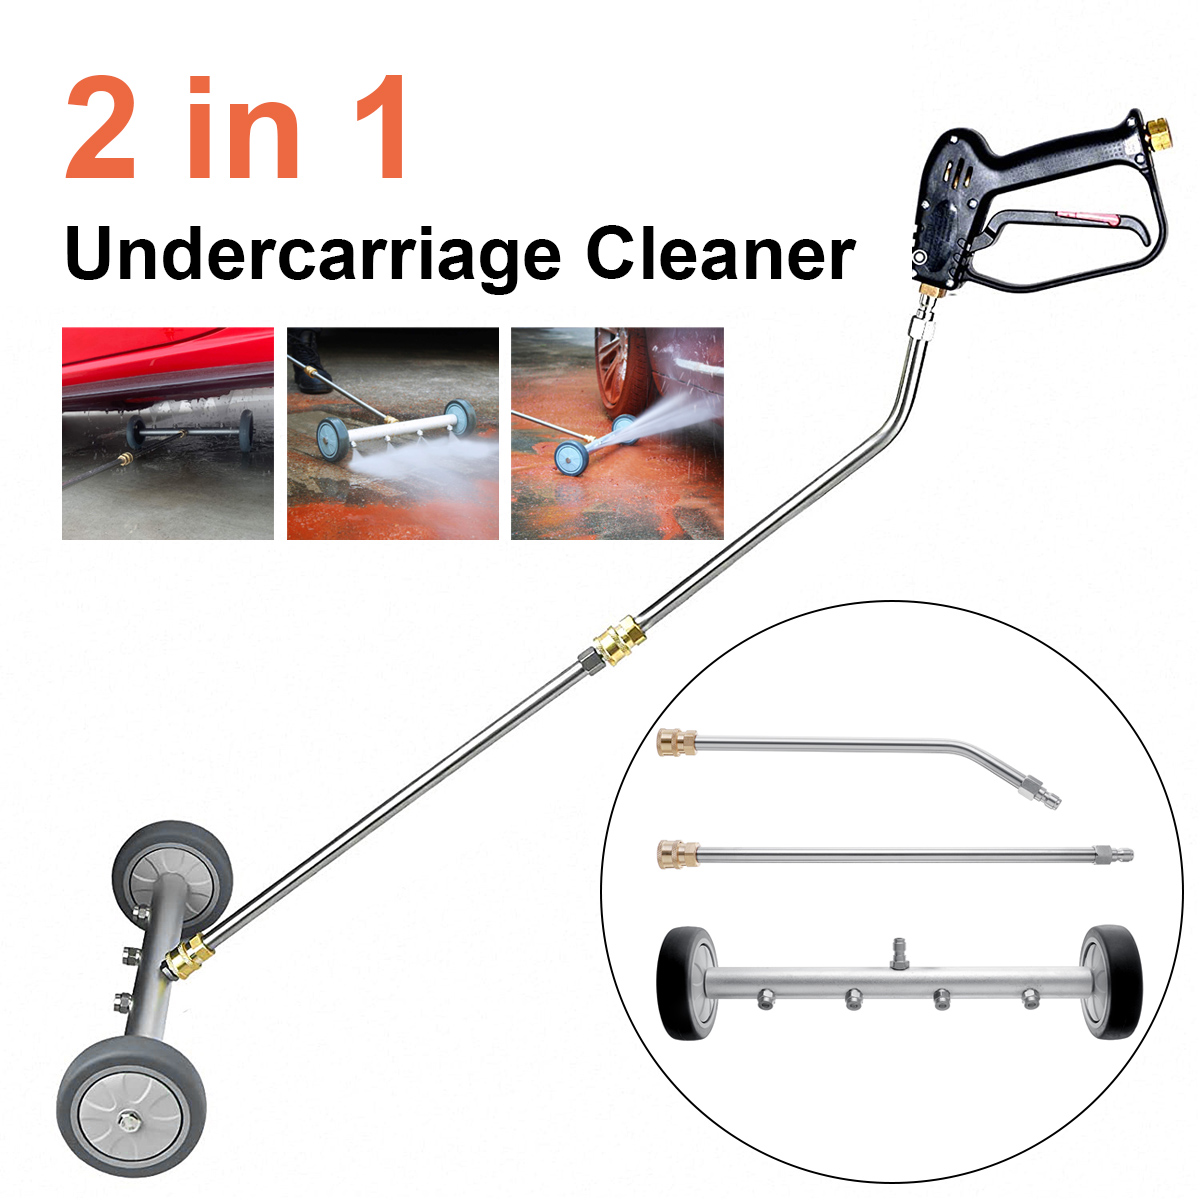 2-IN-1-Pressure-Washer-Undercarriage-Cleaner-4000PSI-Underbody-Car-Wash-Broom-US-1936837-2